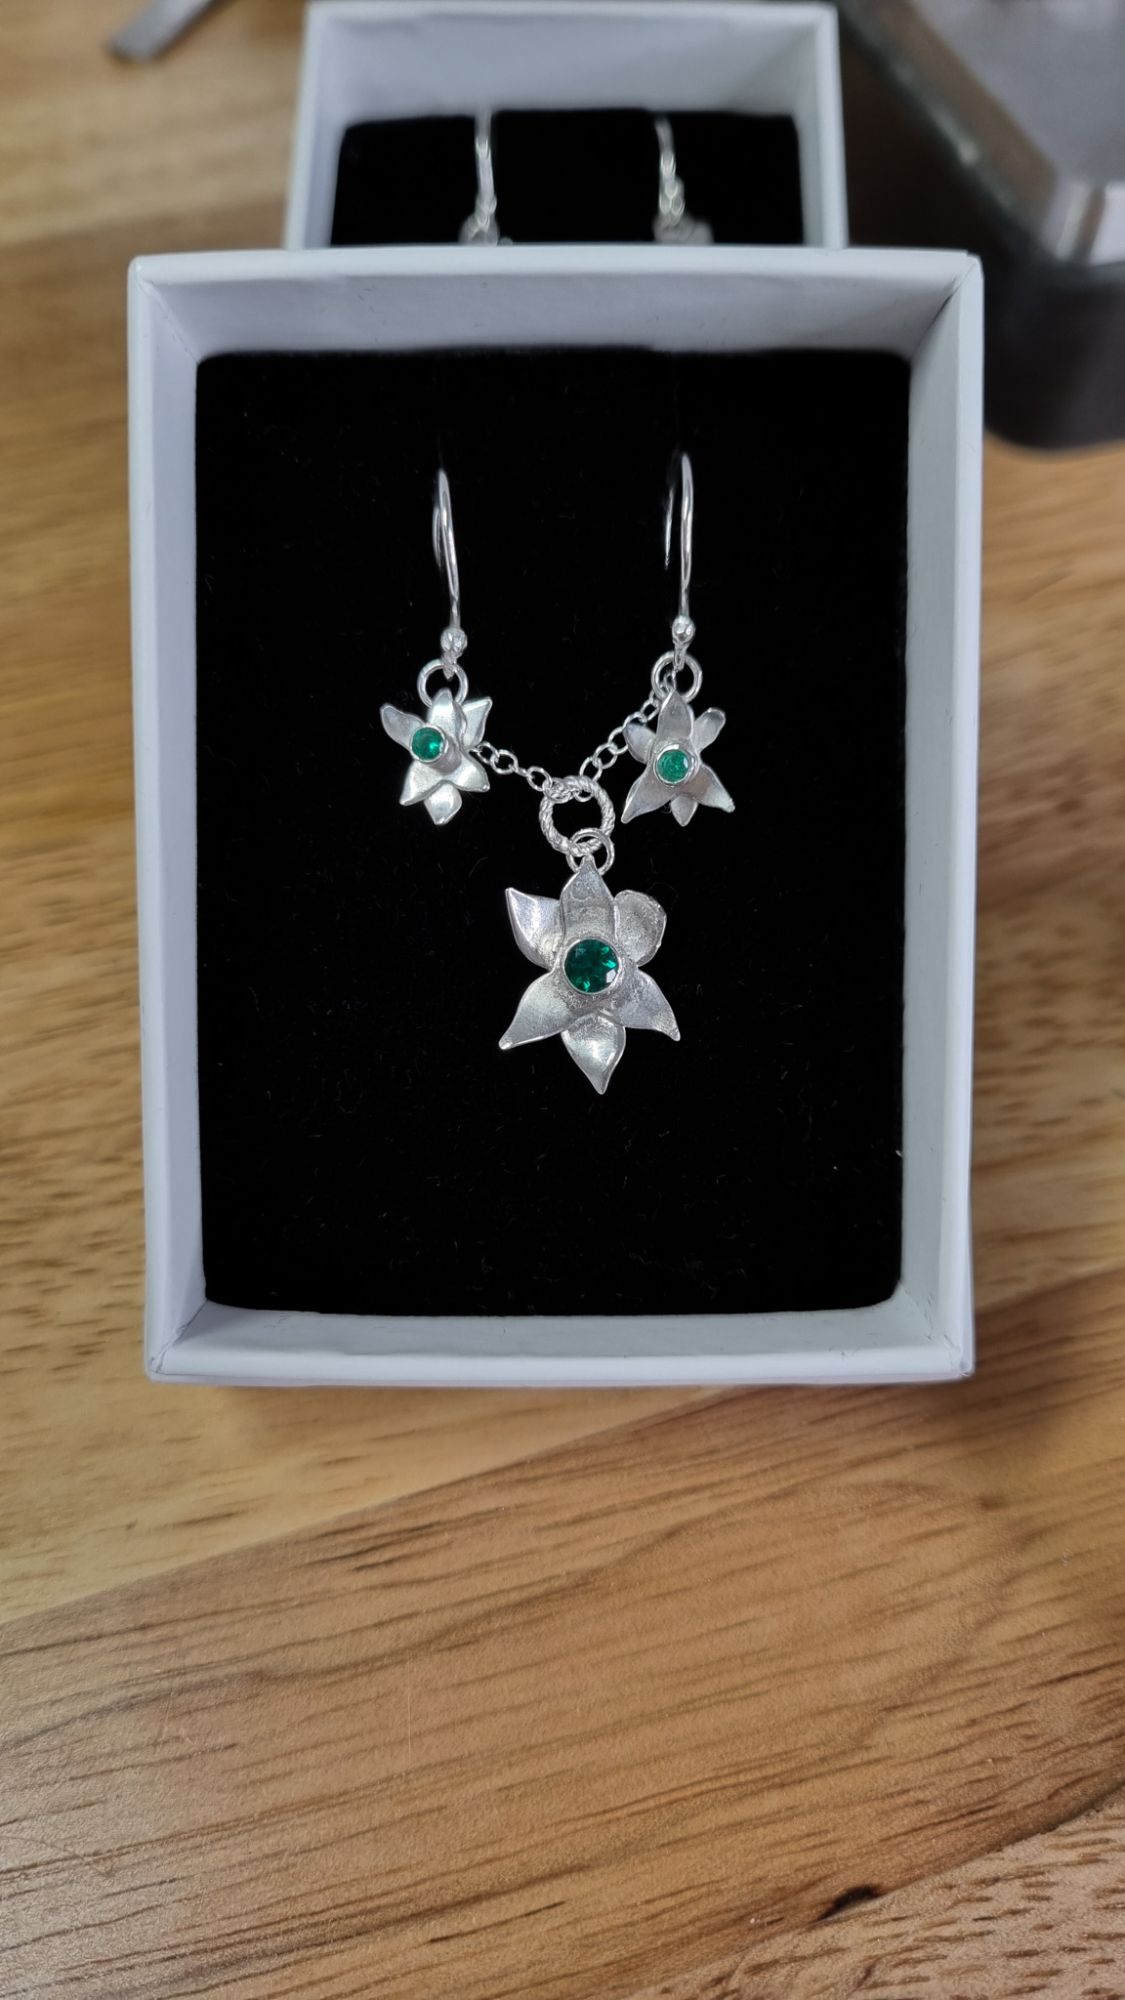 Hydrothermal Emerals and Lily Silver Necklace and Earring Set handmade by Streets Craft Creations